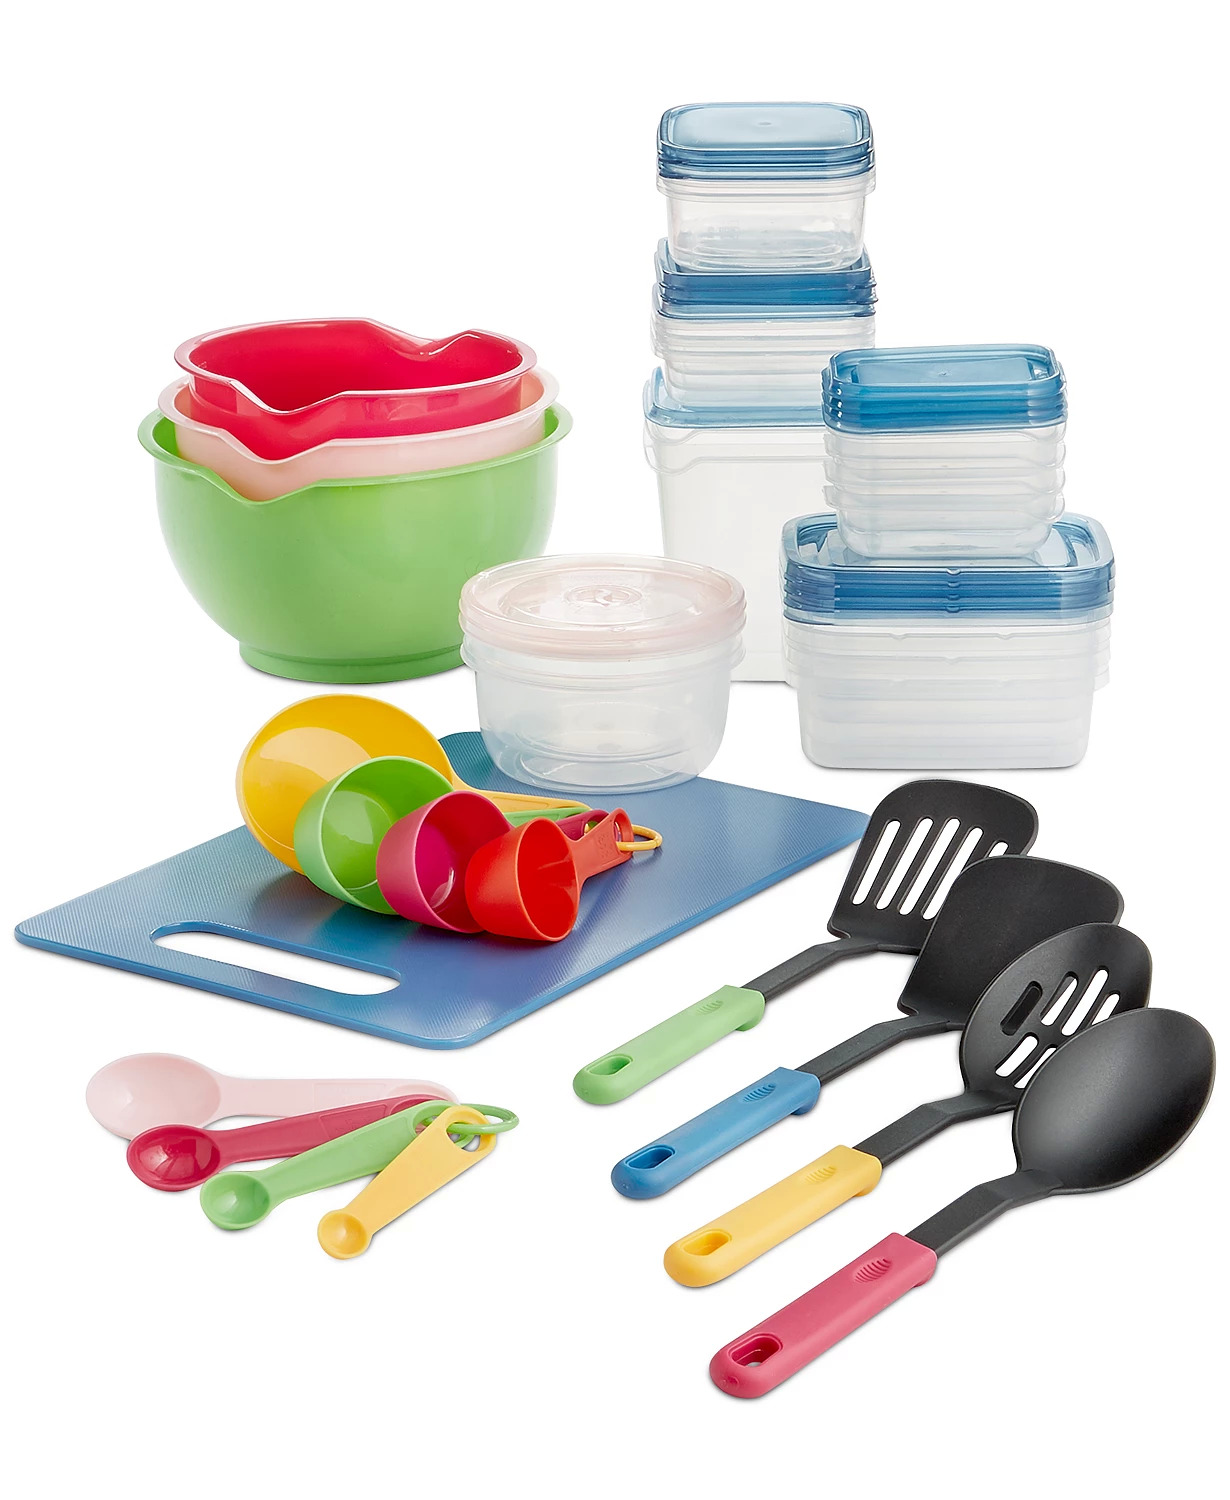 50-Piece Art & Cook Kitchen Prep Set  (Mixing Bowls, Food Storage, Cutting Board & More) $17.93 + SD Cashback + Free Store Pickup at Macy's or FS on $25+